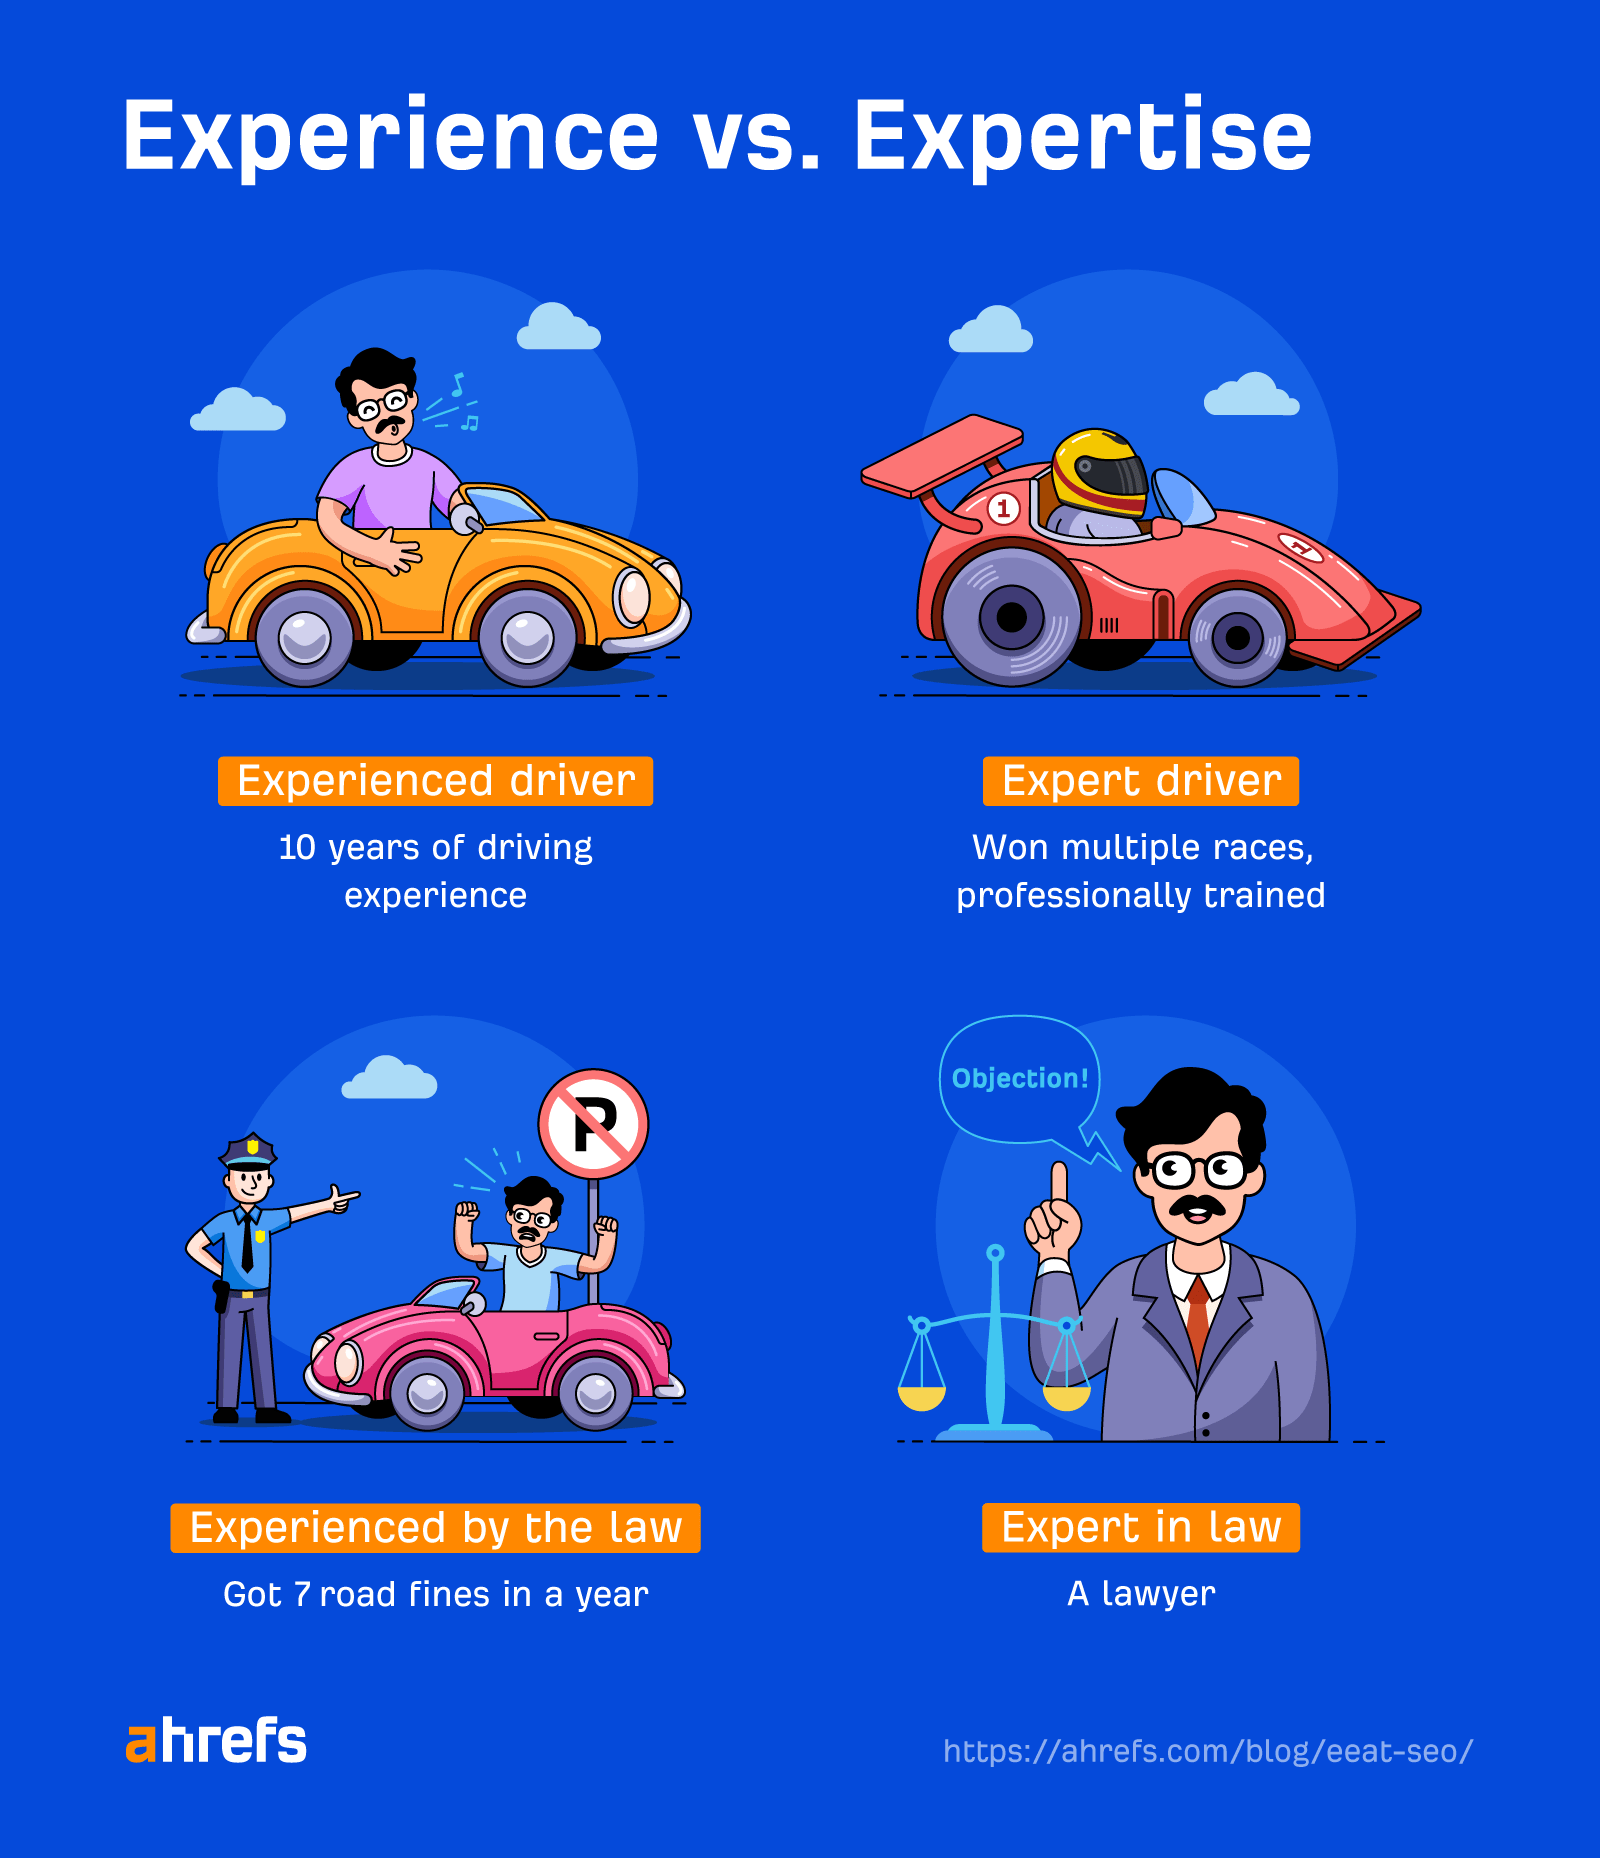 Experience vs Expertise